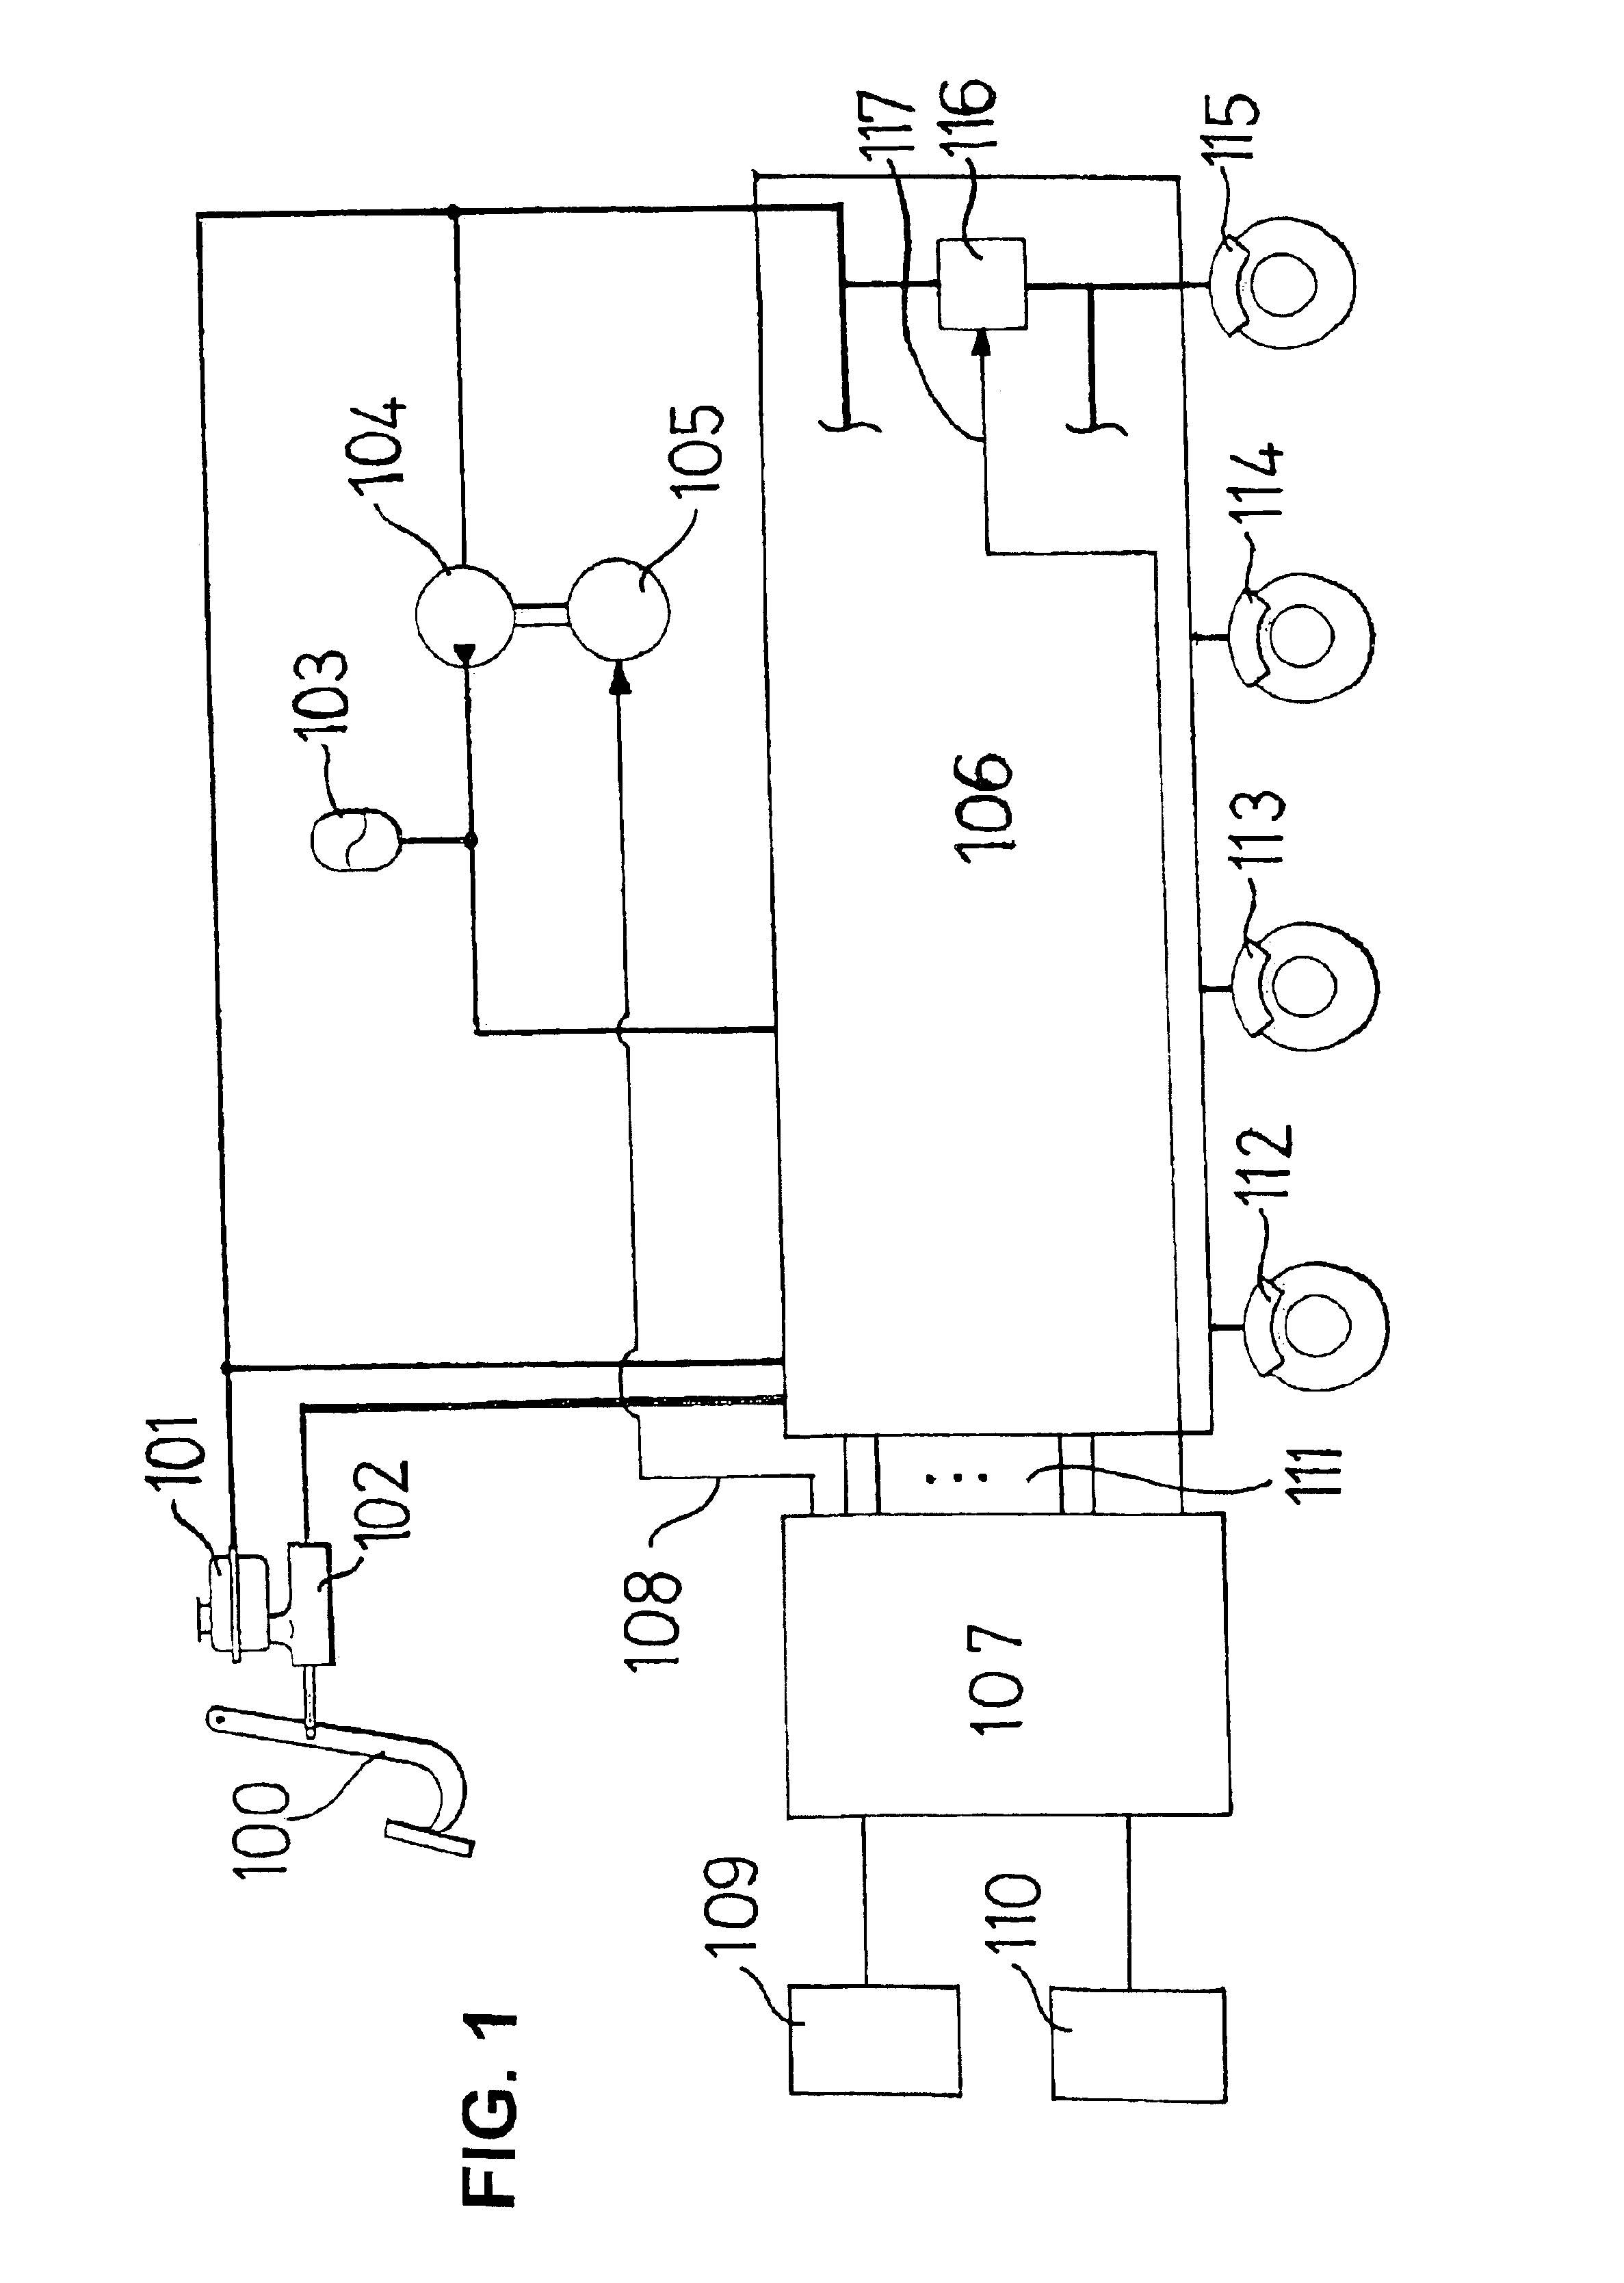 Method and device for controlling units in a vehicle according to the level of noise